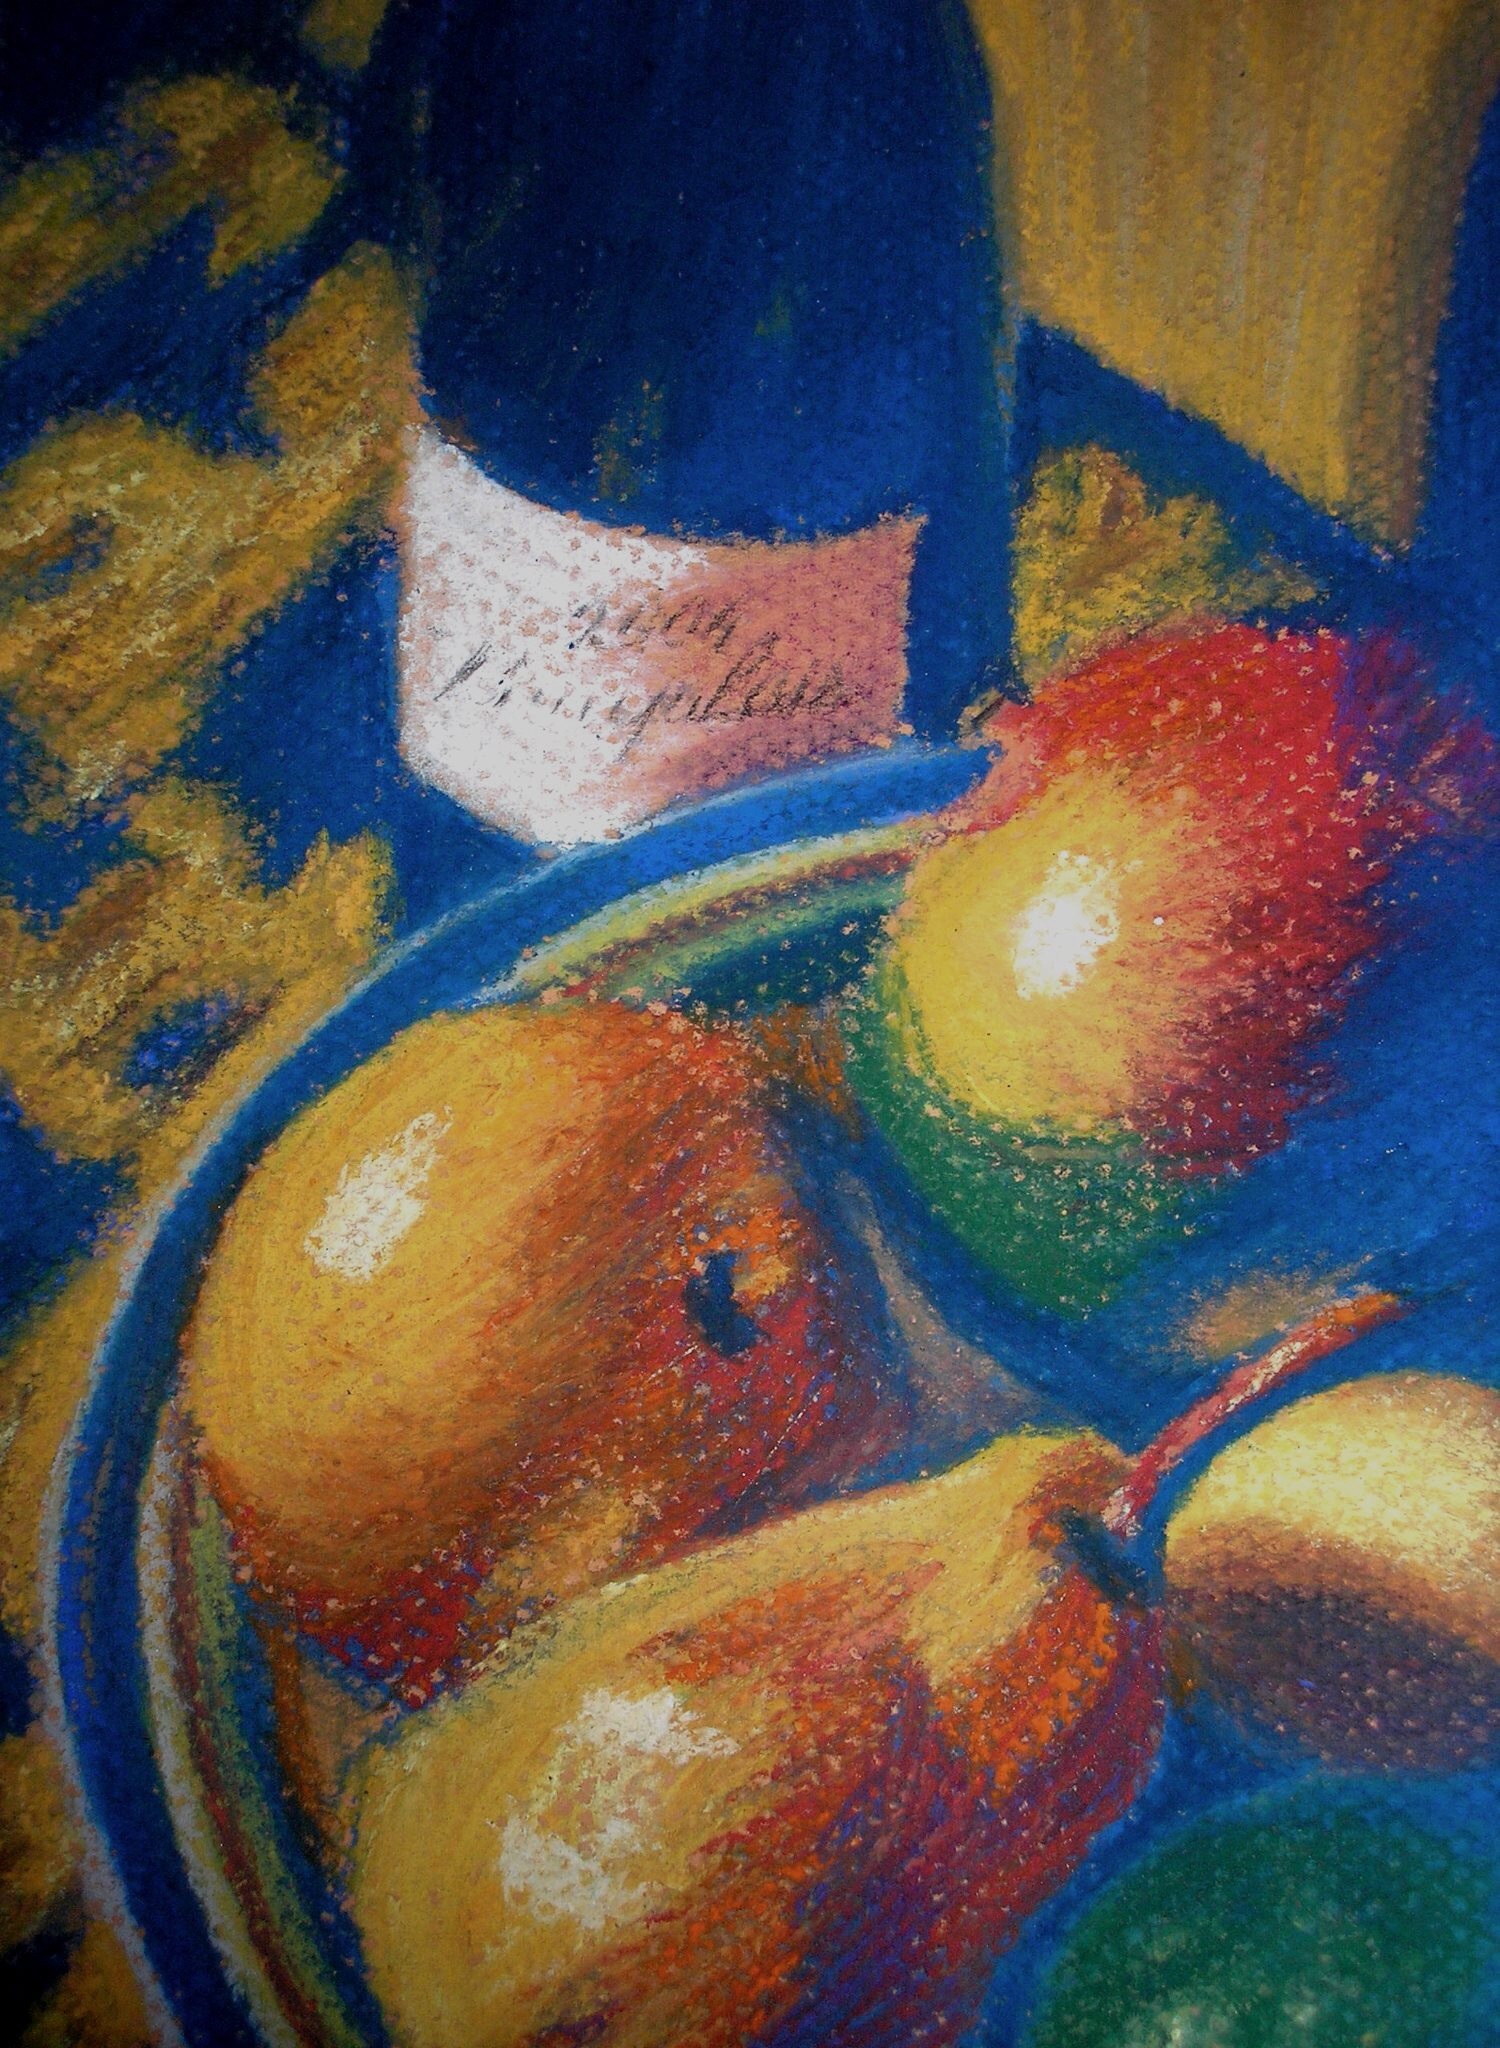    Wine and Fruit    9 in x 12 in  pastel on pastel paper       